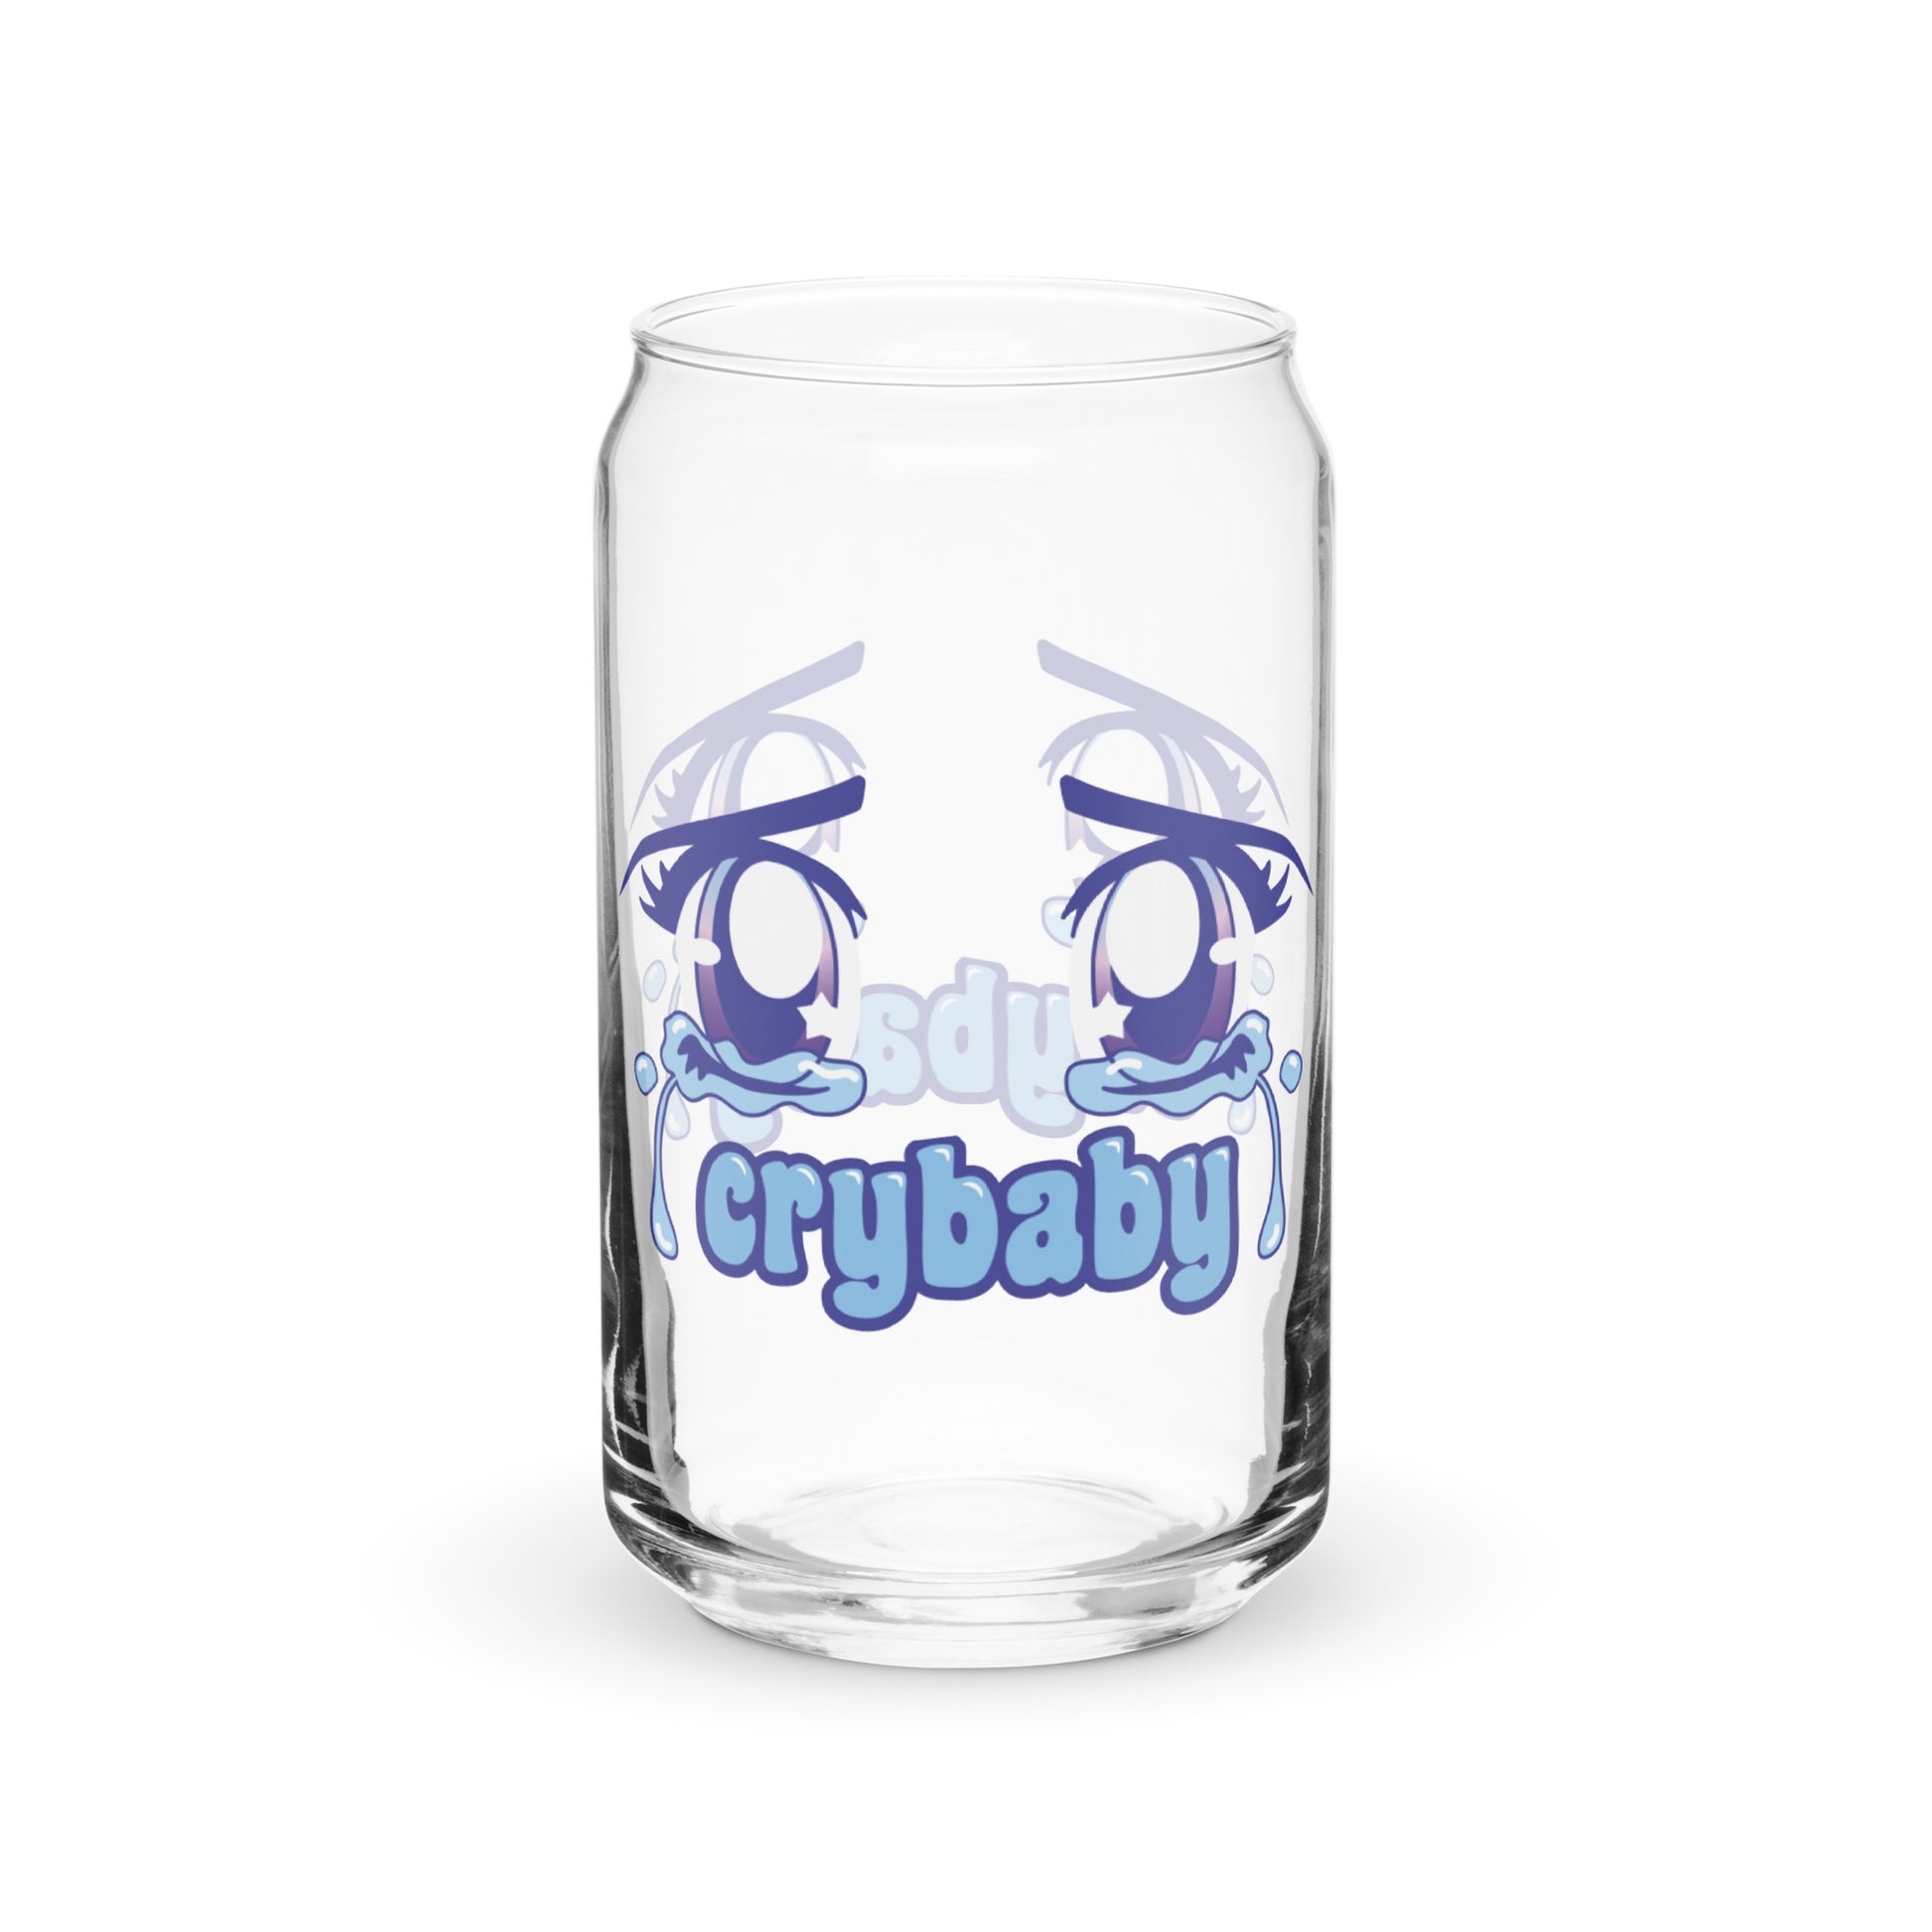 A 16 ounce can-shaped glass featuring an illustration of large, sparkling purple anime eyes with tears streaming down. Text underneath the eyes reads "Crybaby" in a rounded blue font.